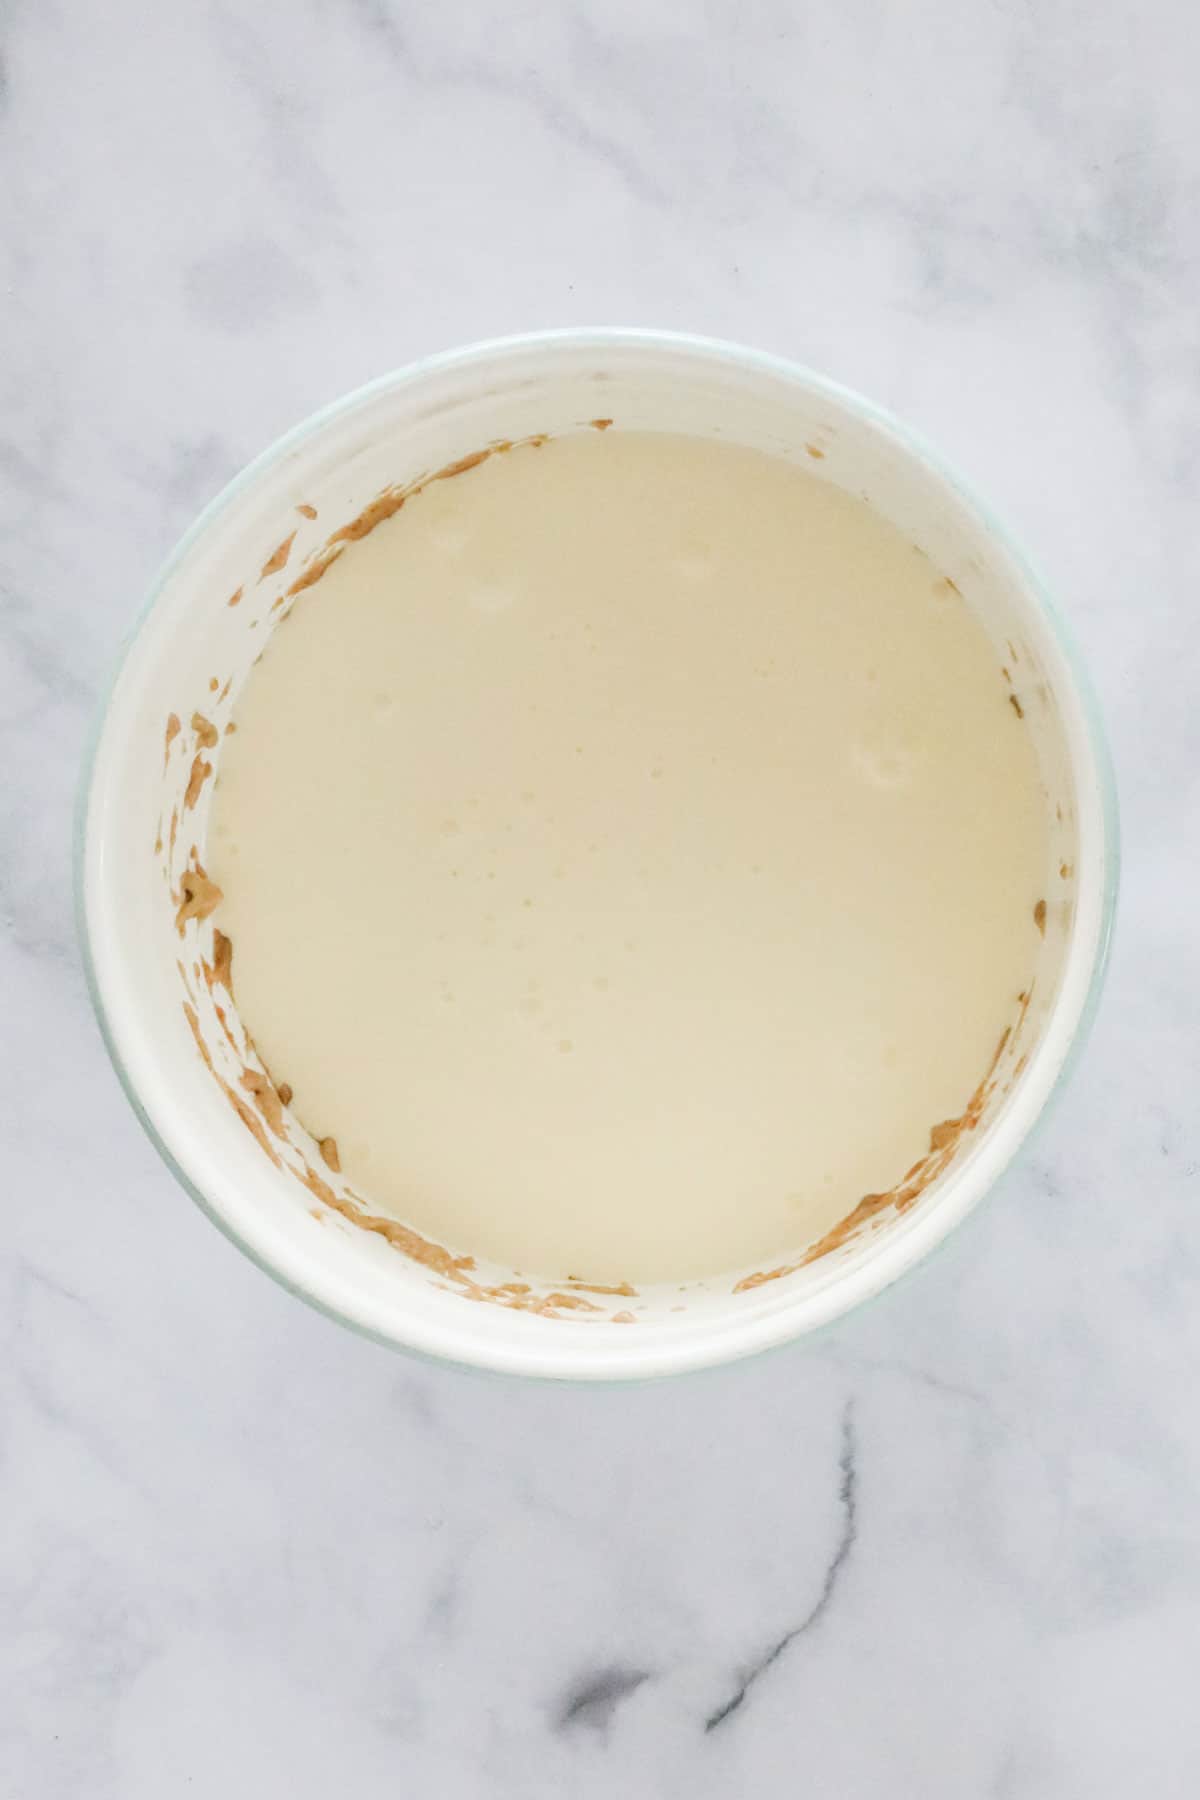 Cream poured into caramel mixture in a white mixing bowl.